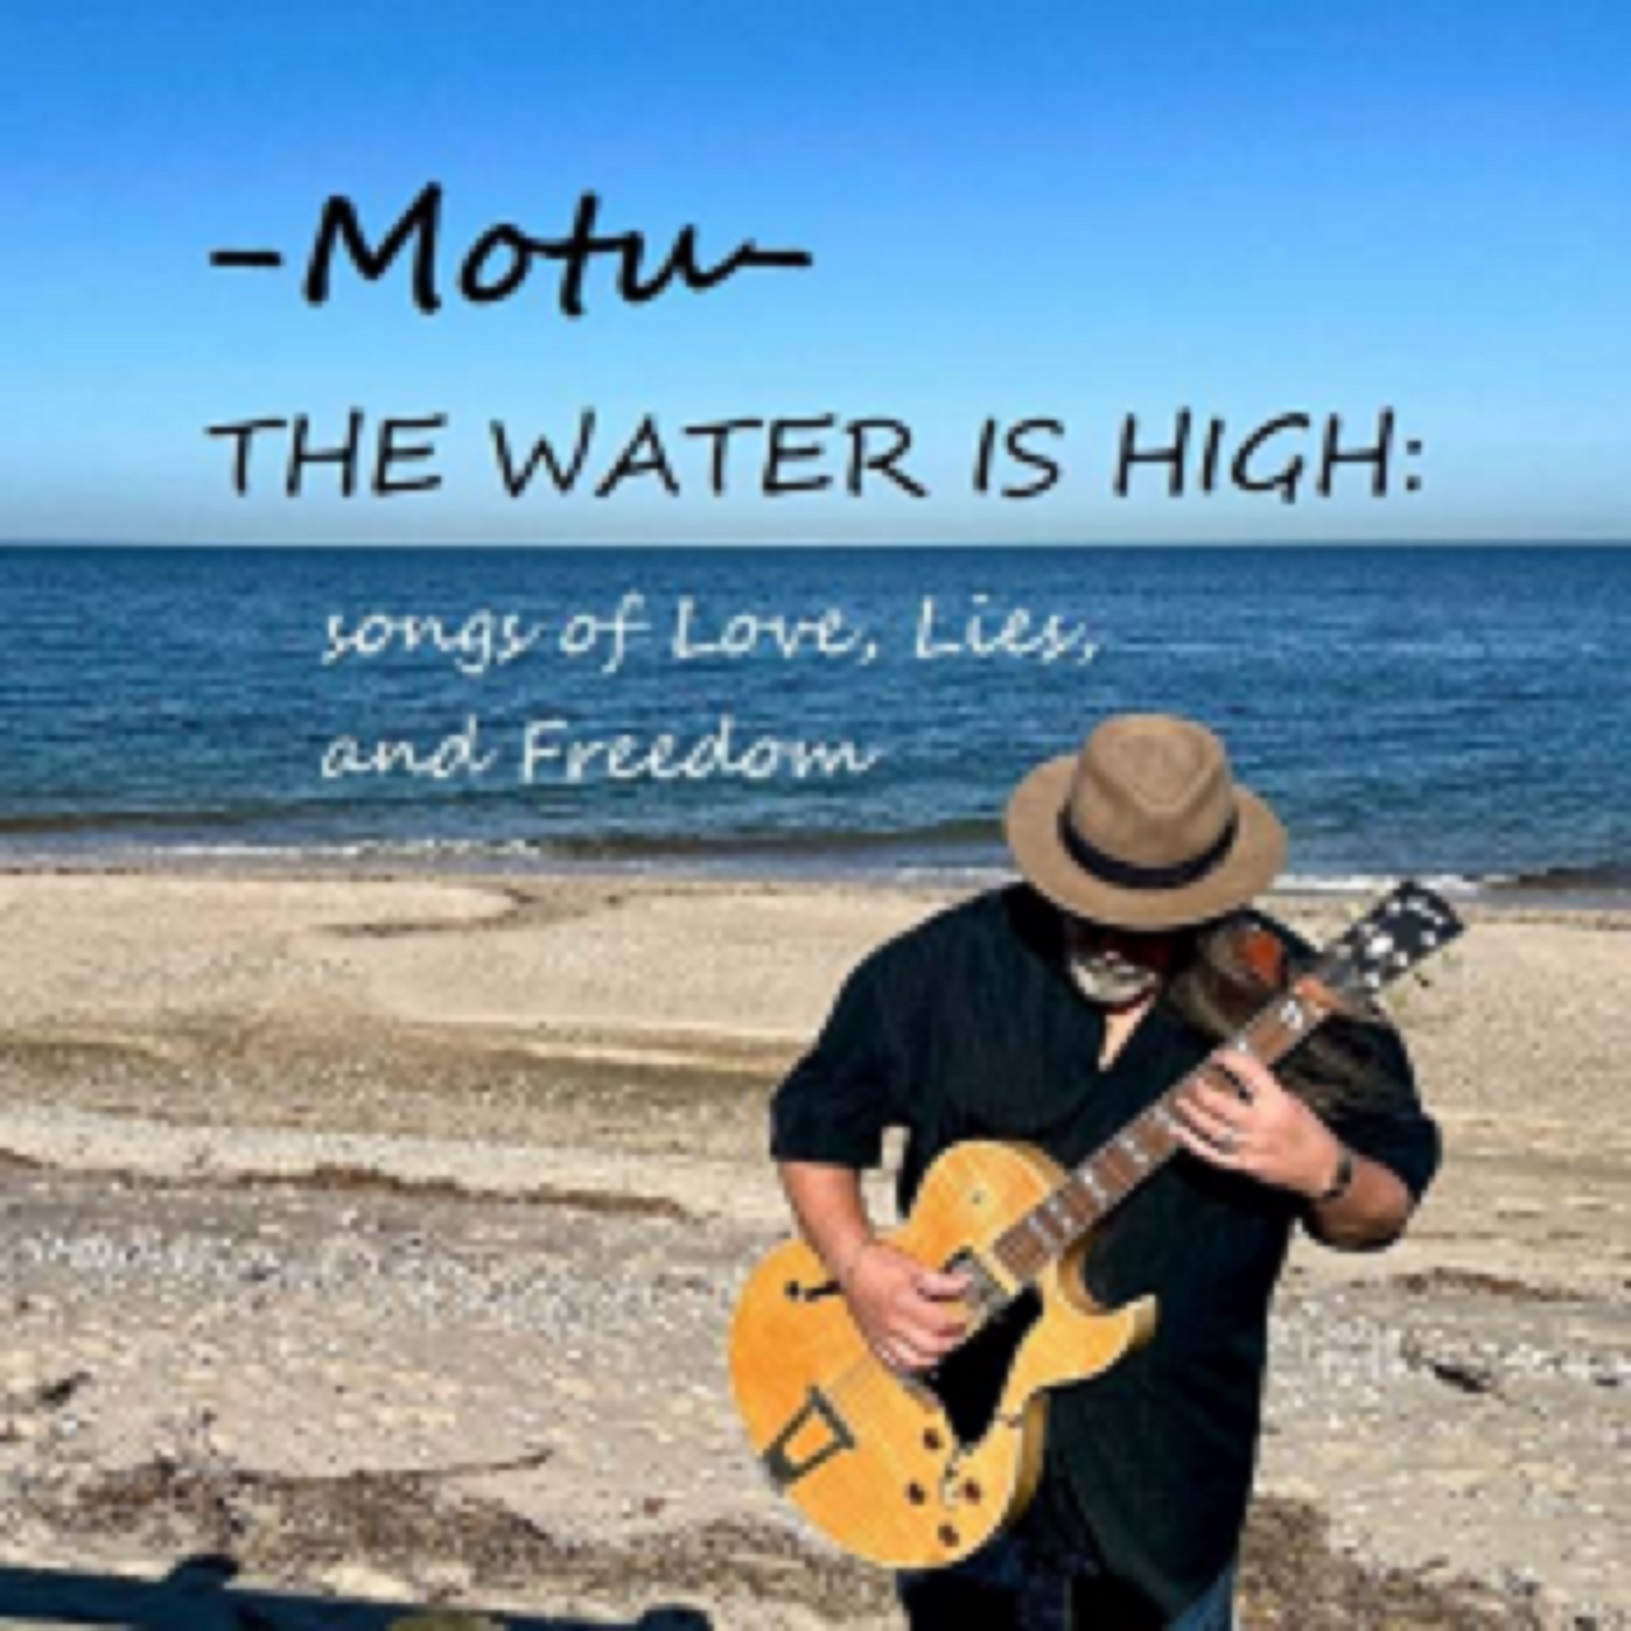 MOTU RELEASES HIS LONG-AWAITED 22ND AMERICANA/BLUES ROCK  ALBUM, “THE WATER IS HIGH"